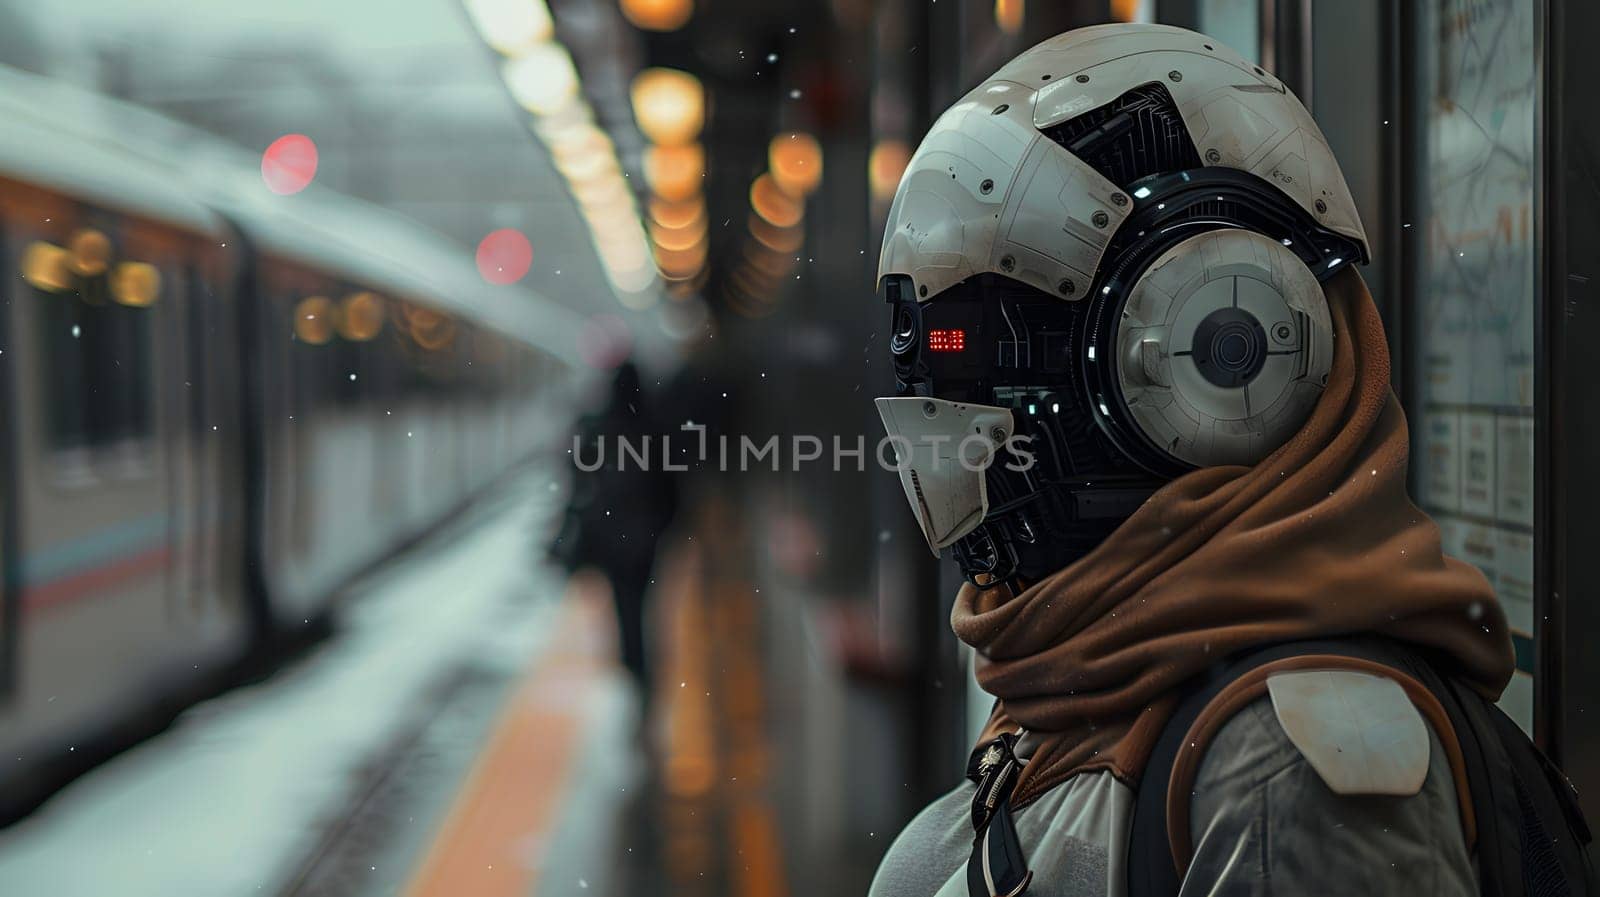 Wearing a futuristic helmet and headphones, waiting for train at a city station by Nadtochiy